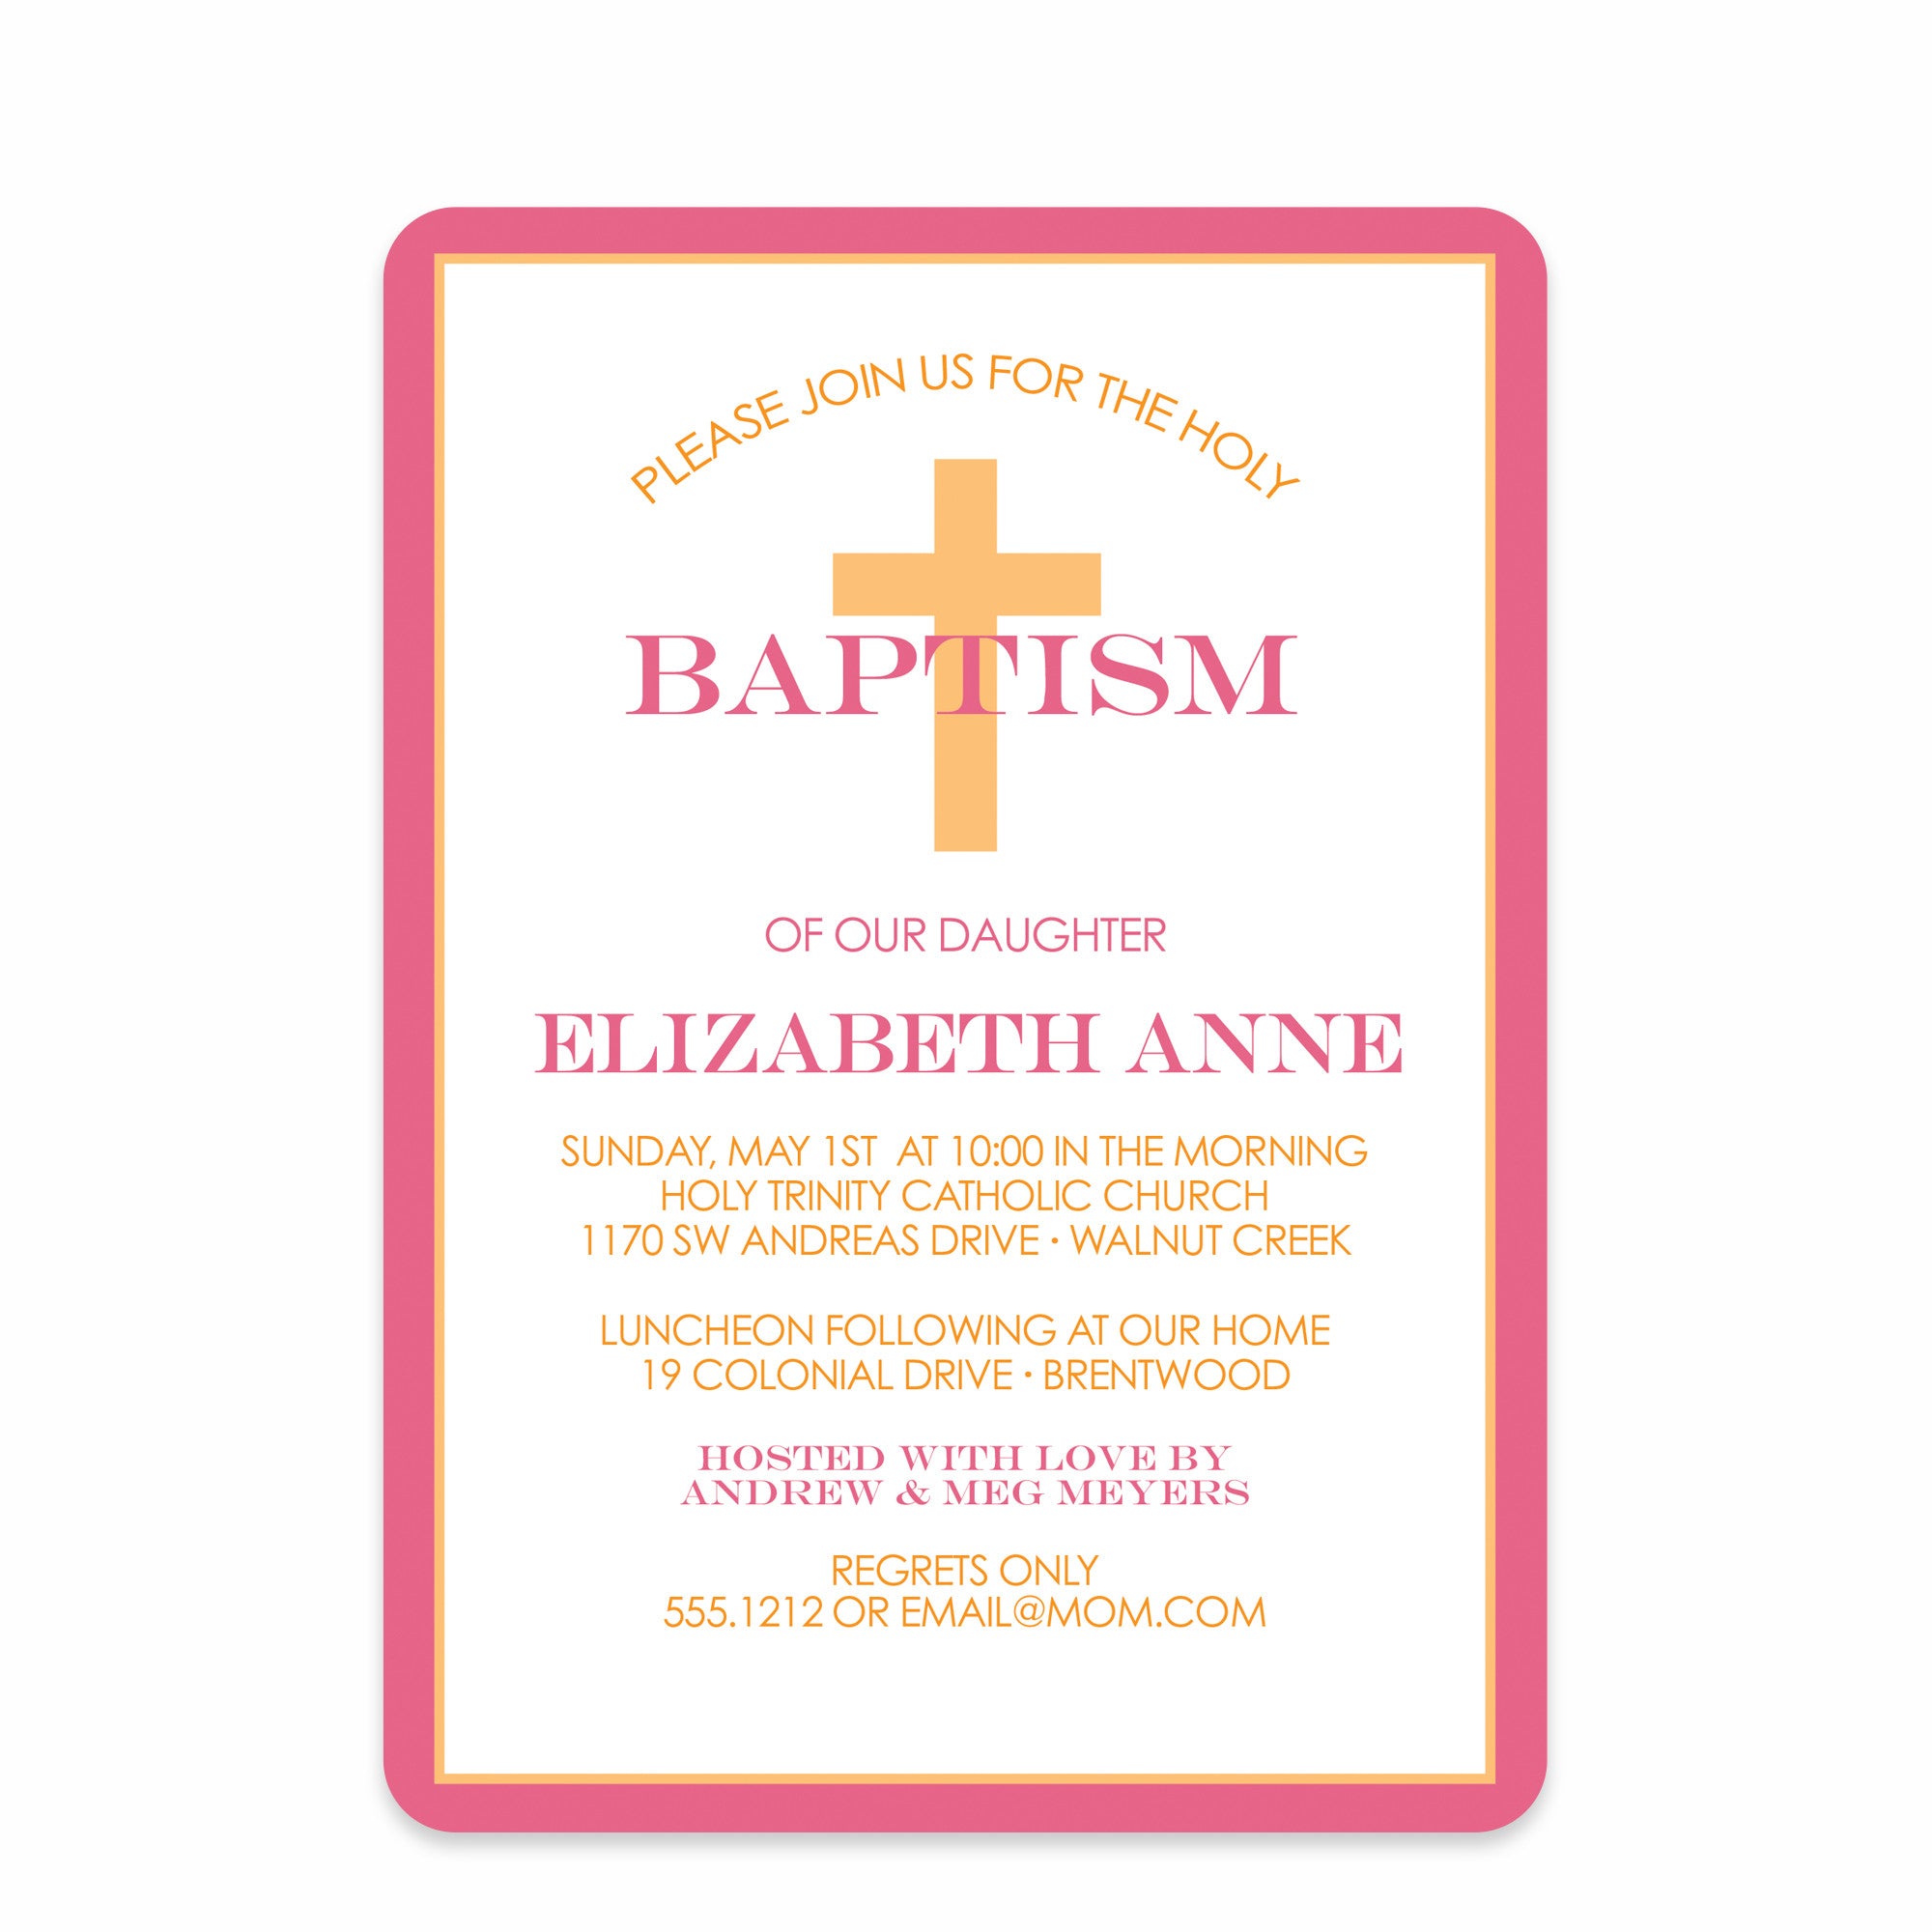 Classic Cross Religious Invitation, Pink, Pipsy.com, front